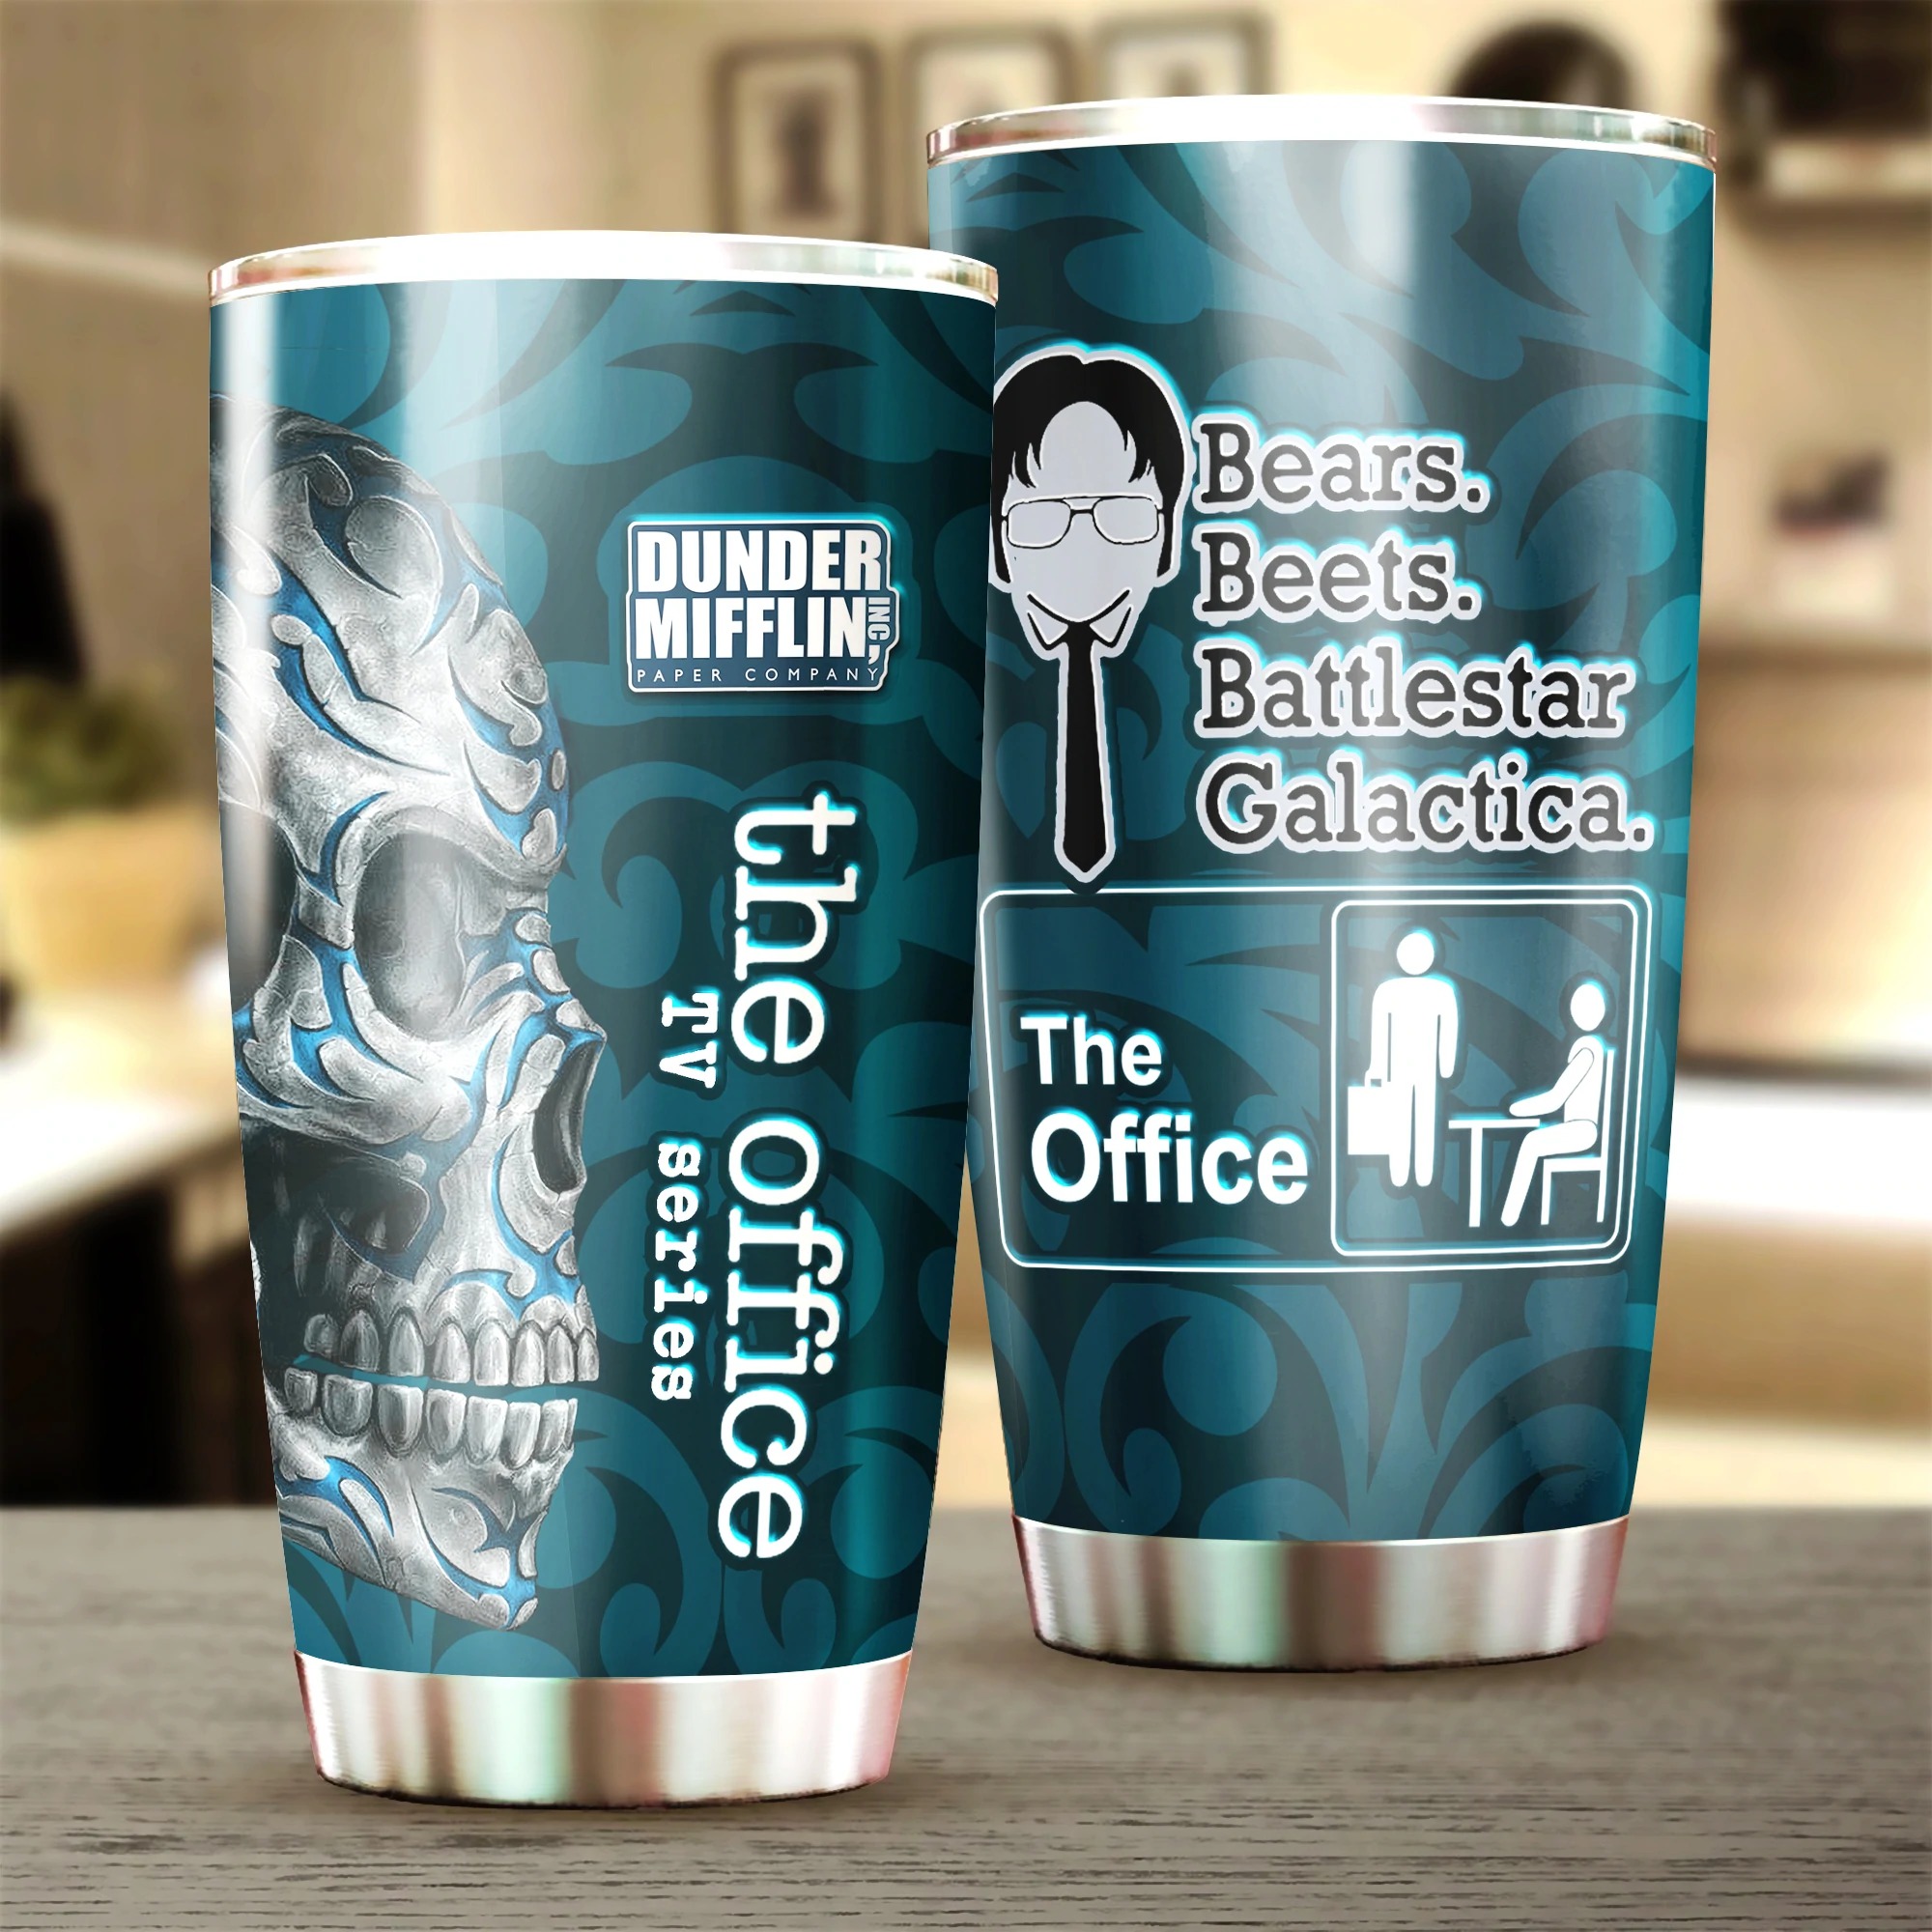 [HOT TREND] The Office Mug Skull Version Dwight Schrute Tumbler Cup – Hothot 230122